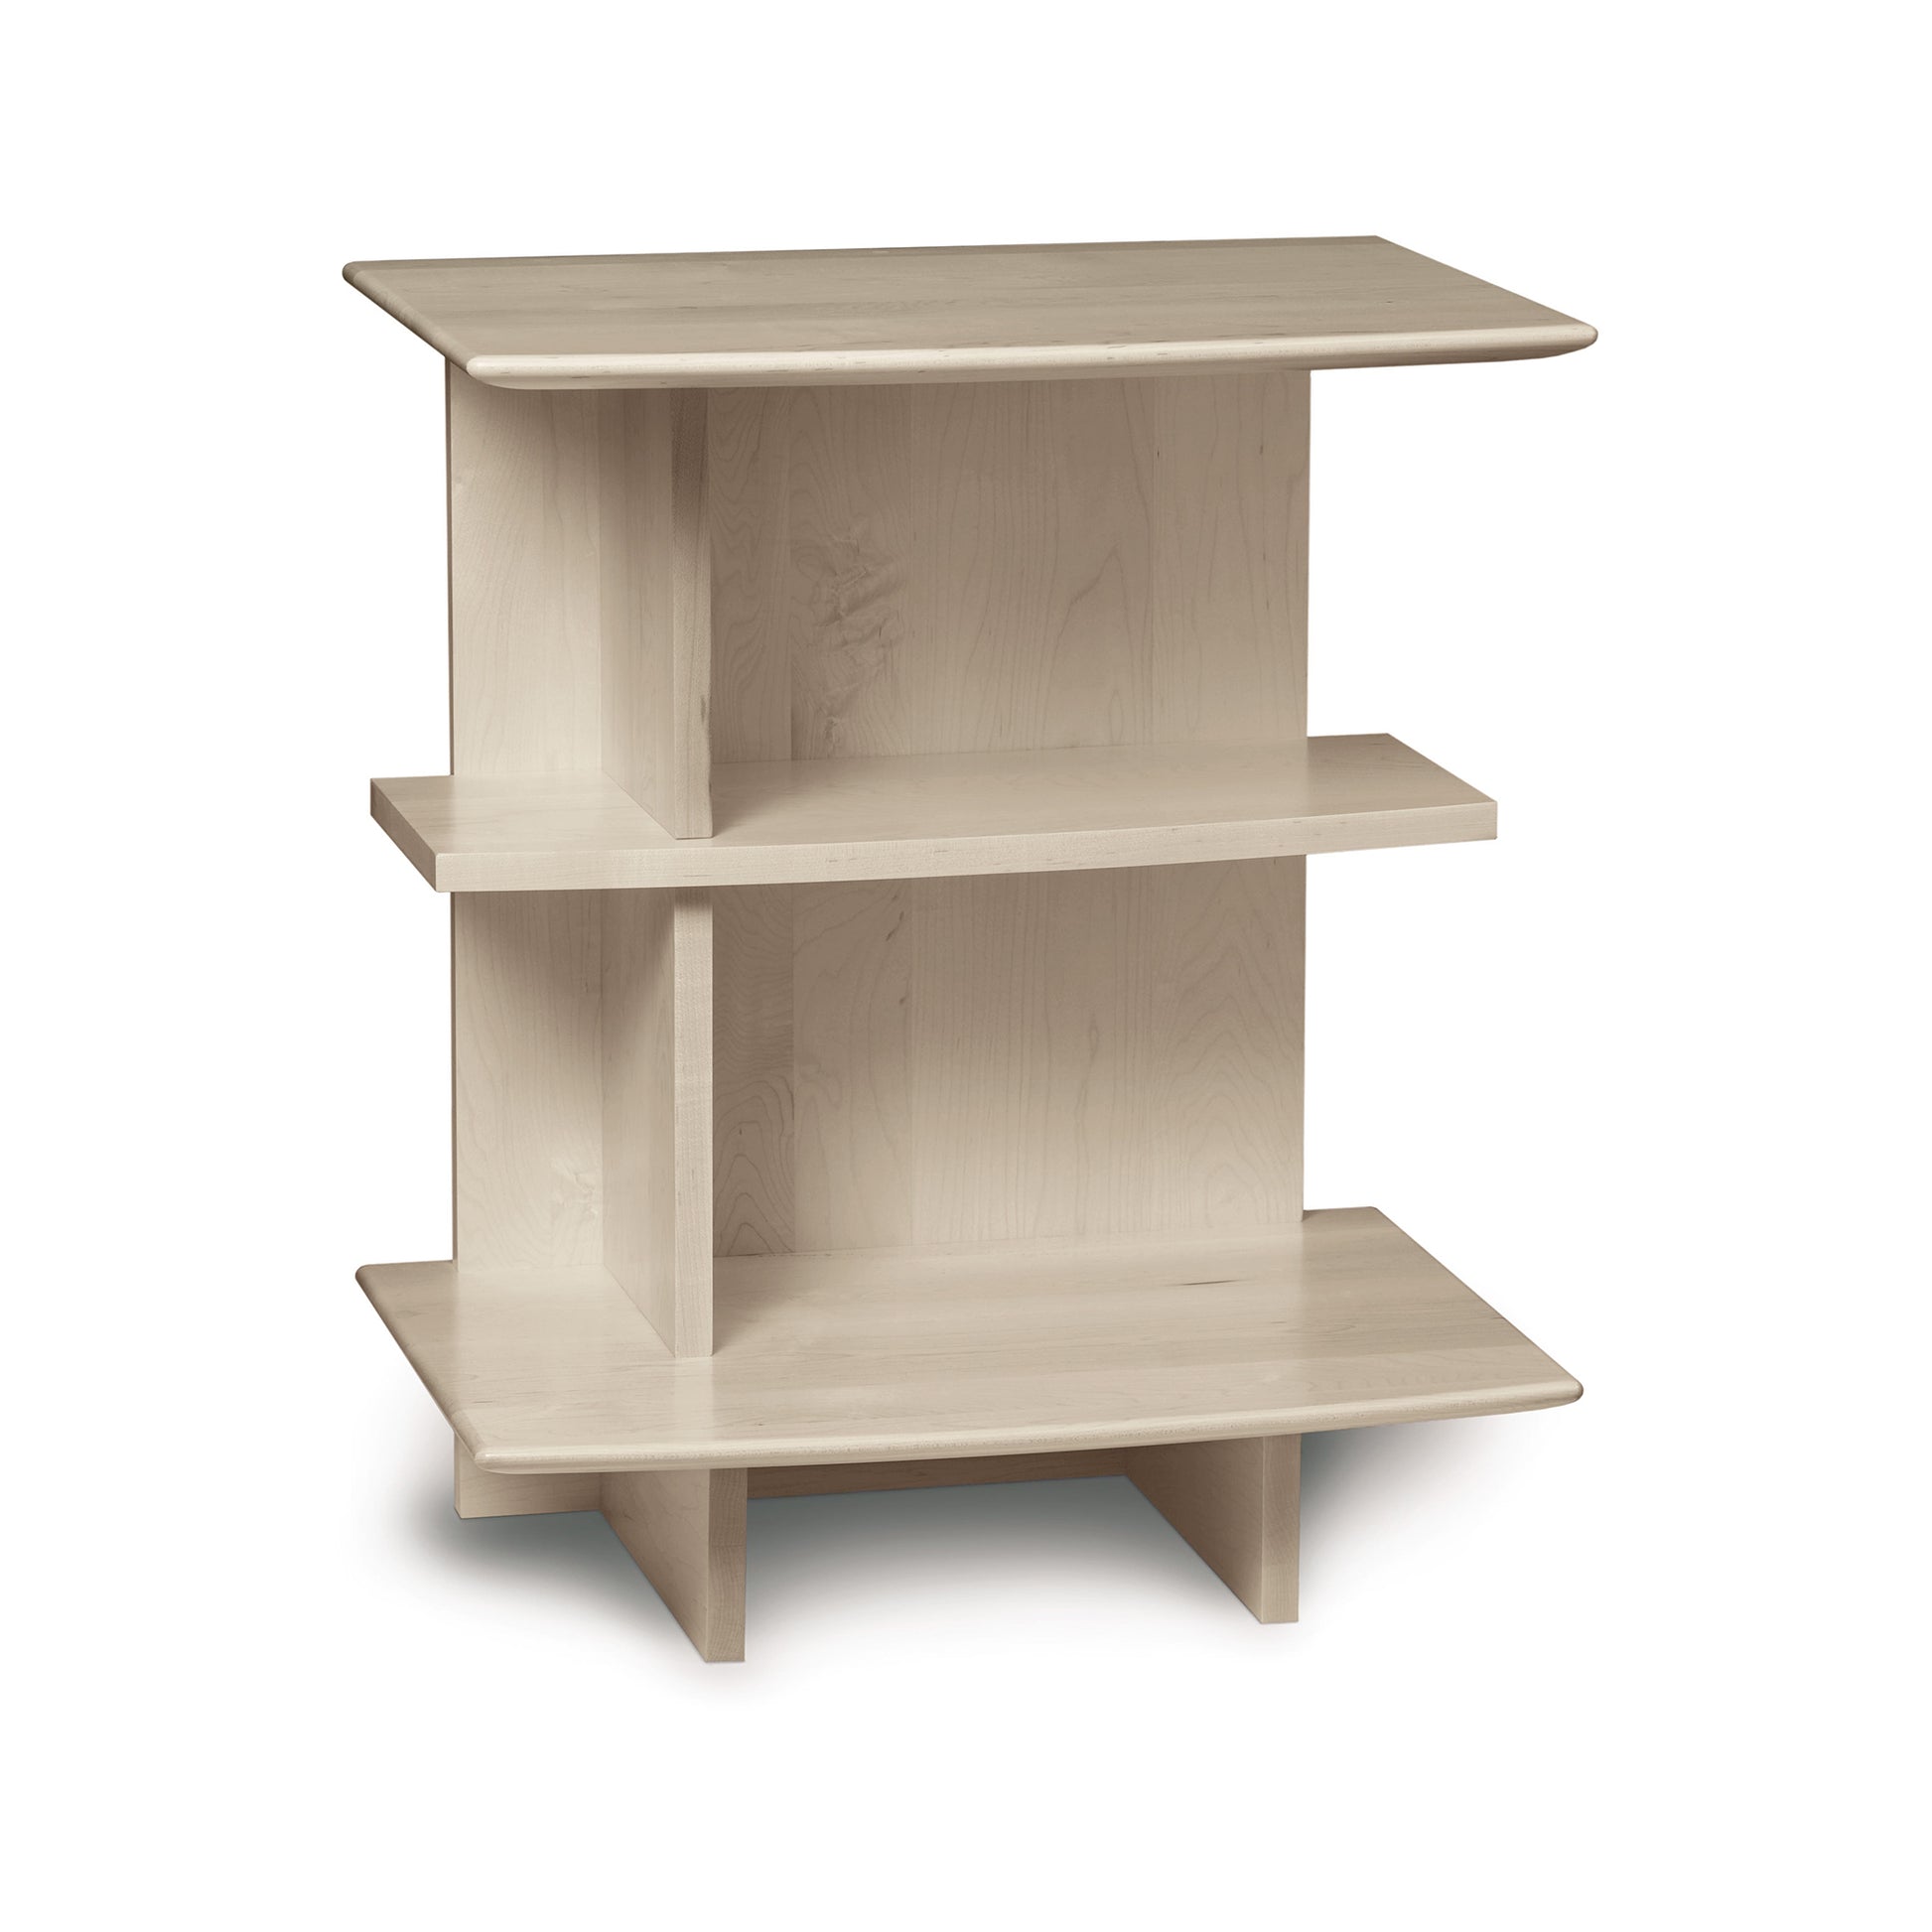 A three-tiered, light-colored wooden corner shelf from the Copeland Furniture Sarah Open Shelf Nightstand Collection isolated on a white background.